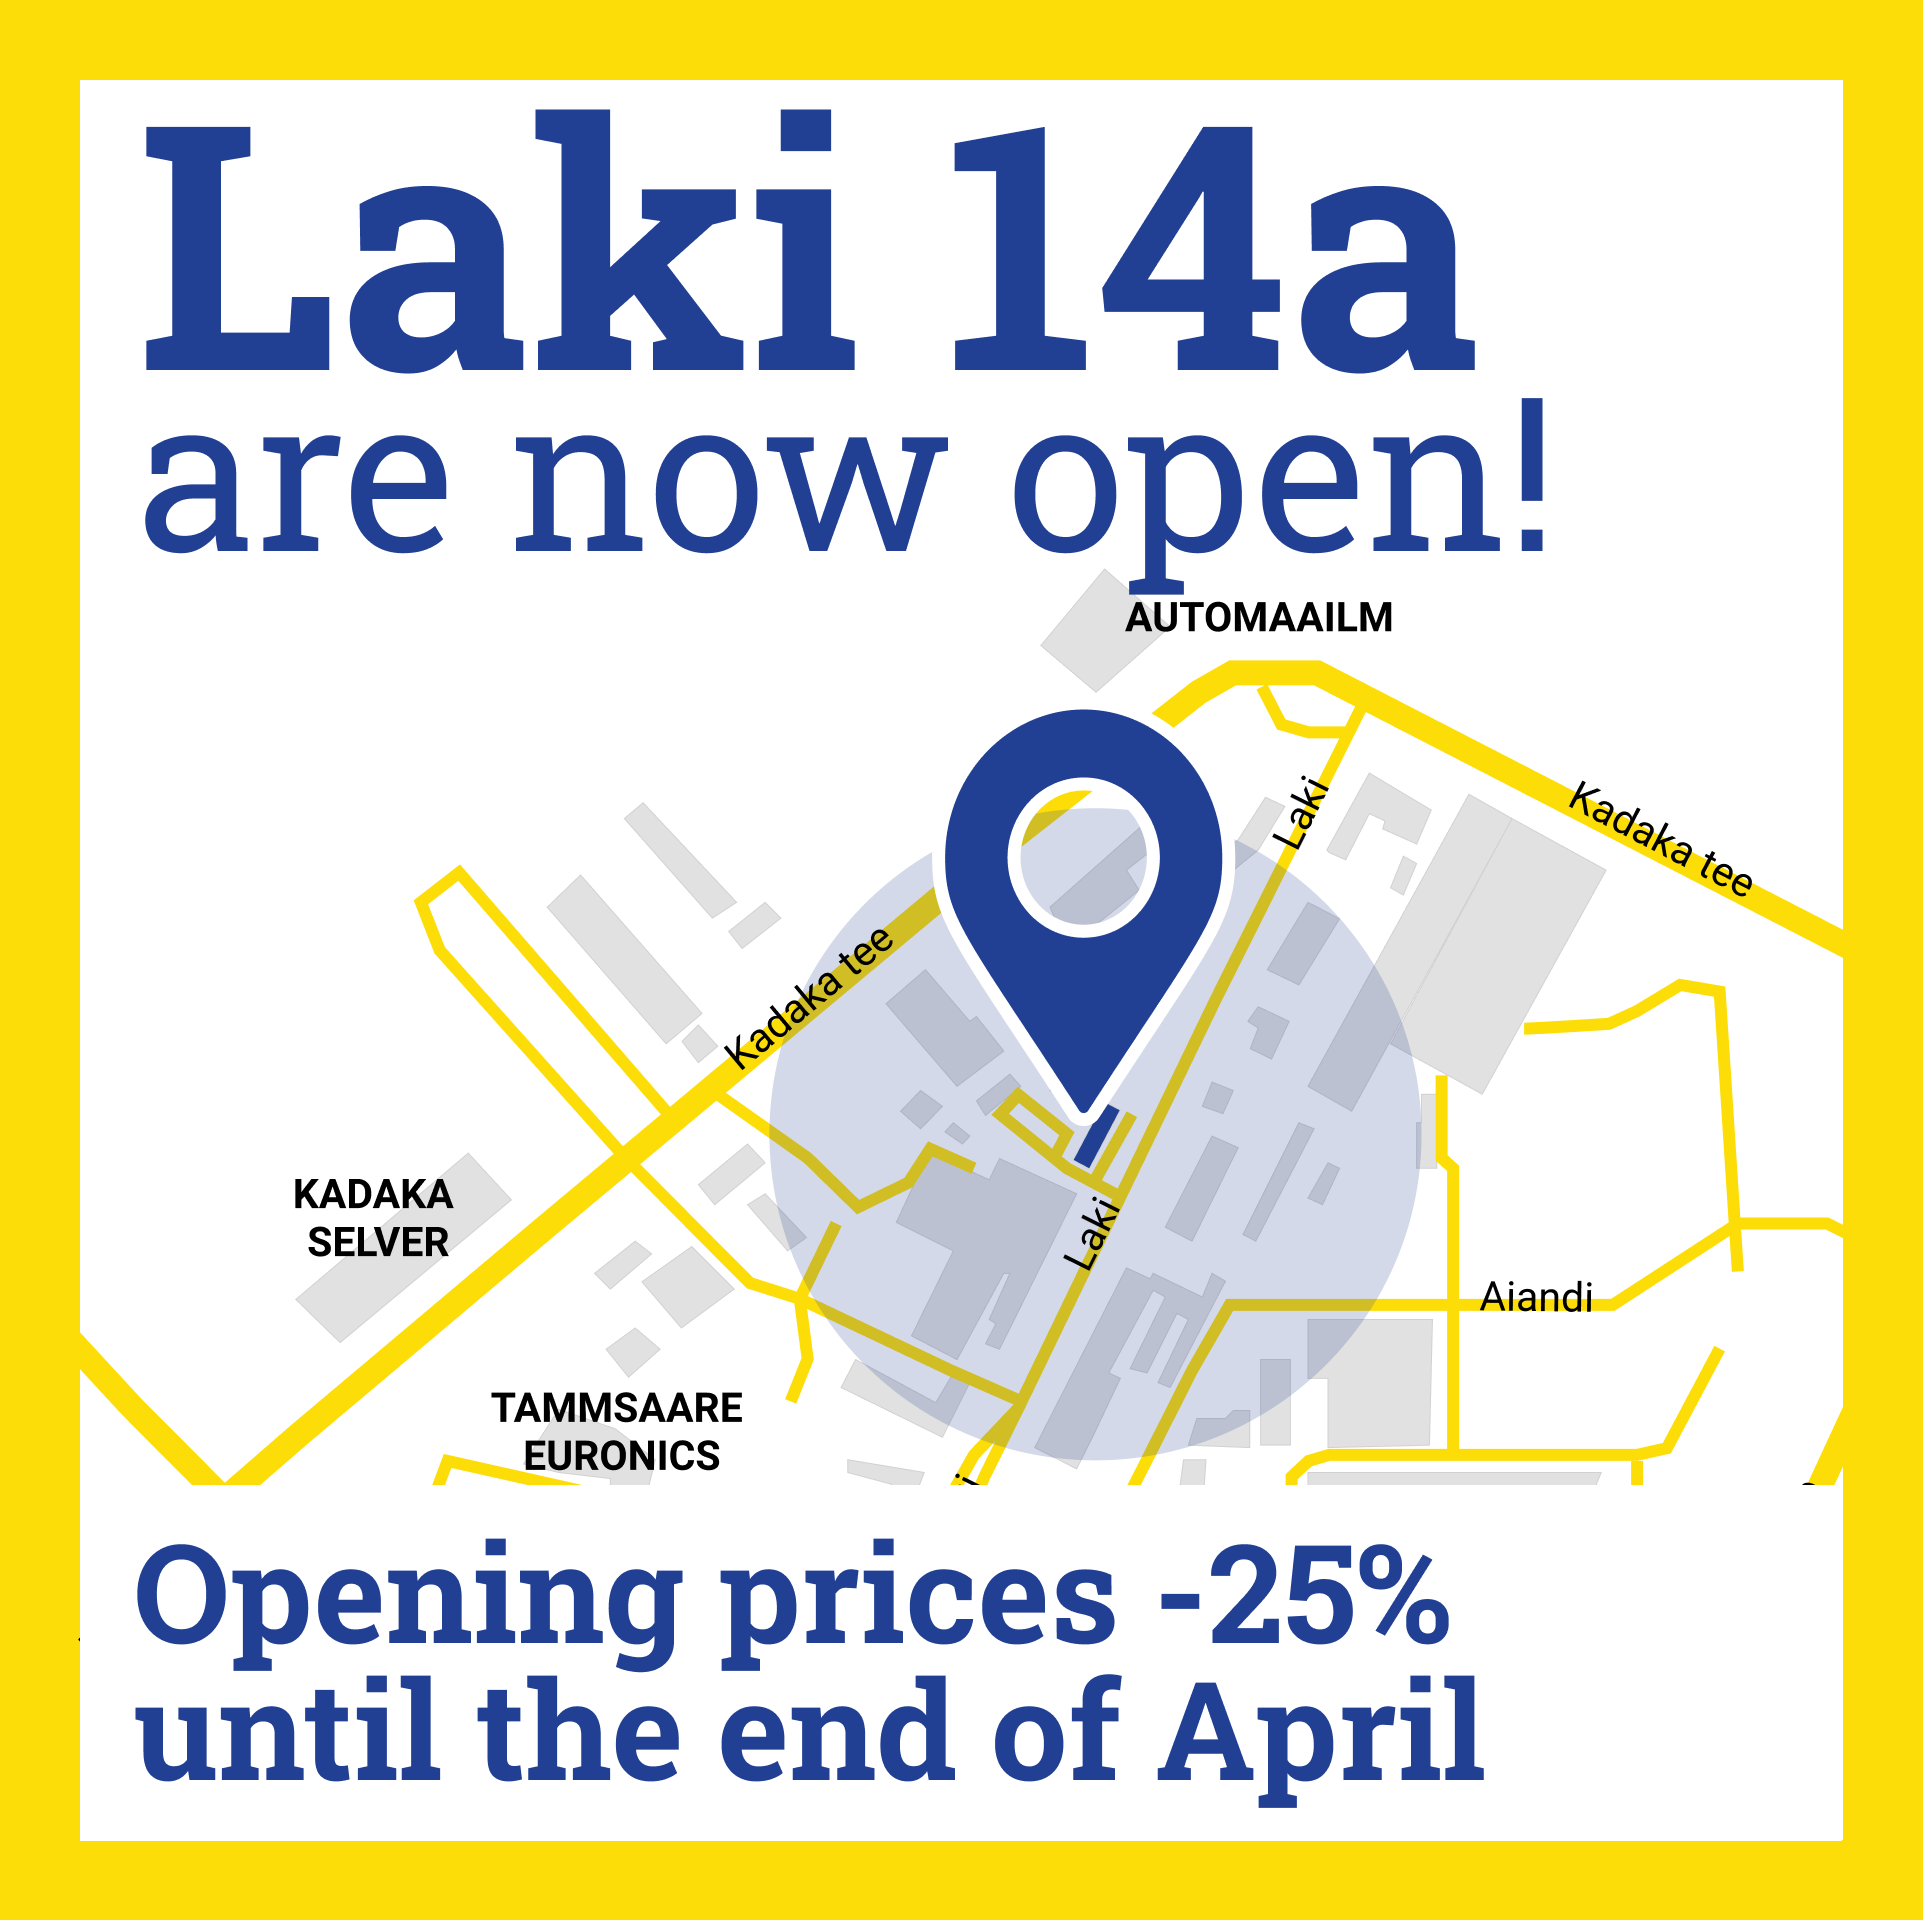 Laki 14a are now open!